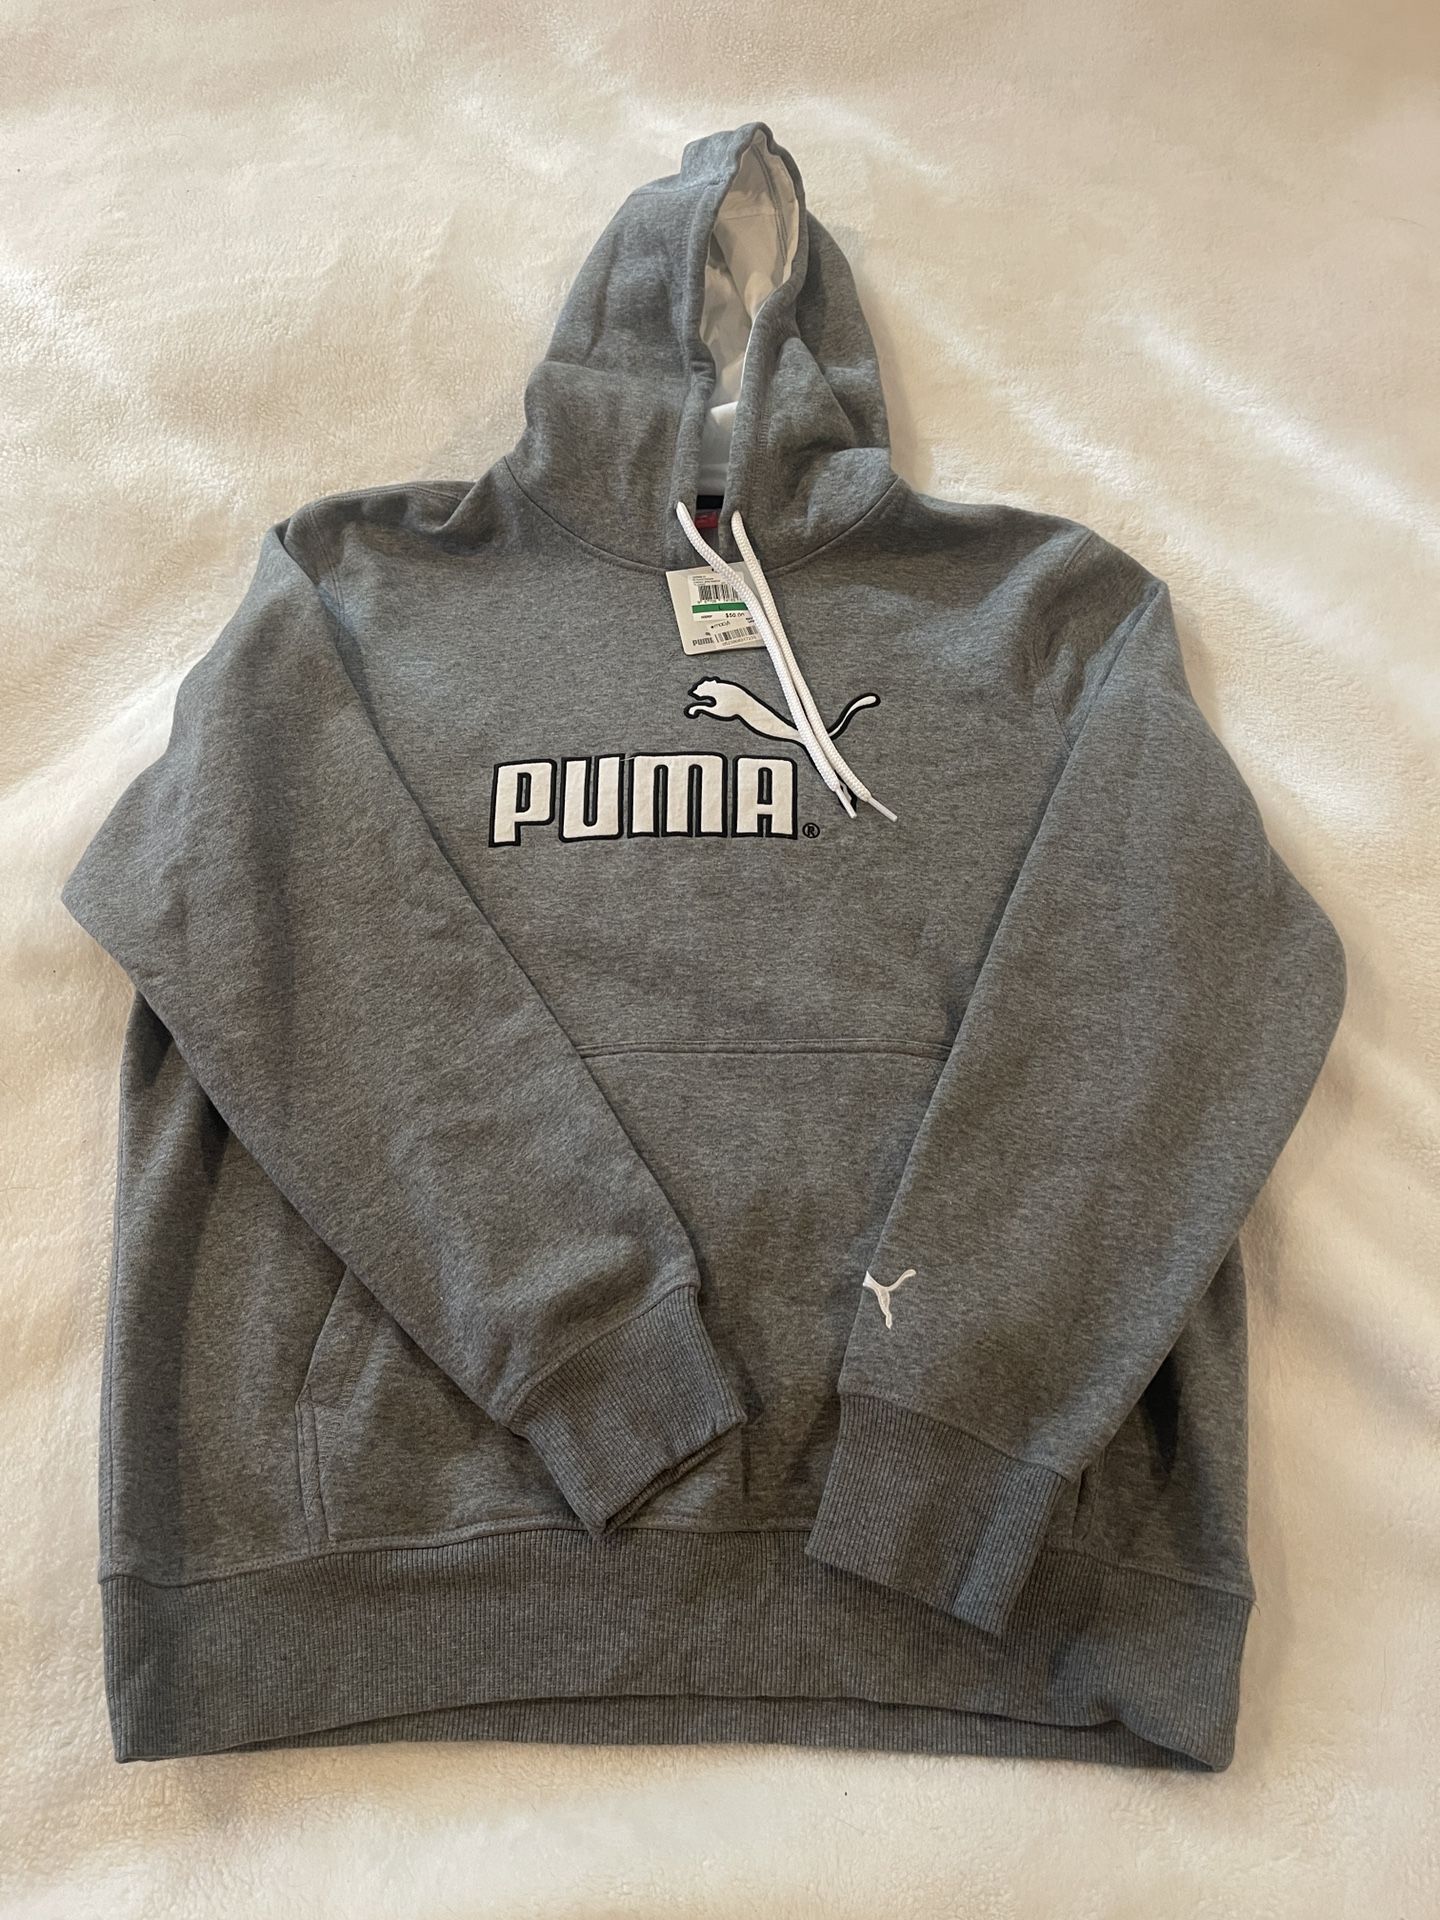 SportLifestyle Puma Grey hoodie size L Thermal insulation Warm Cell - AM926